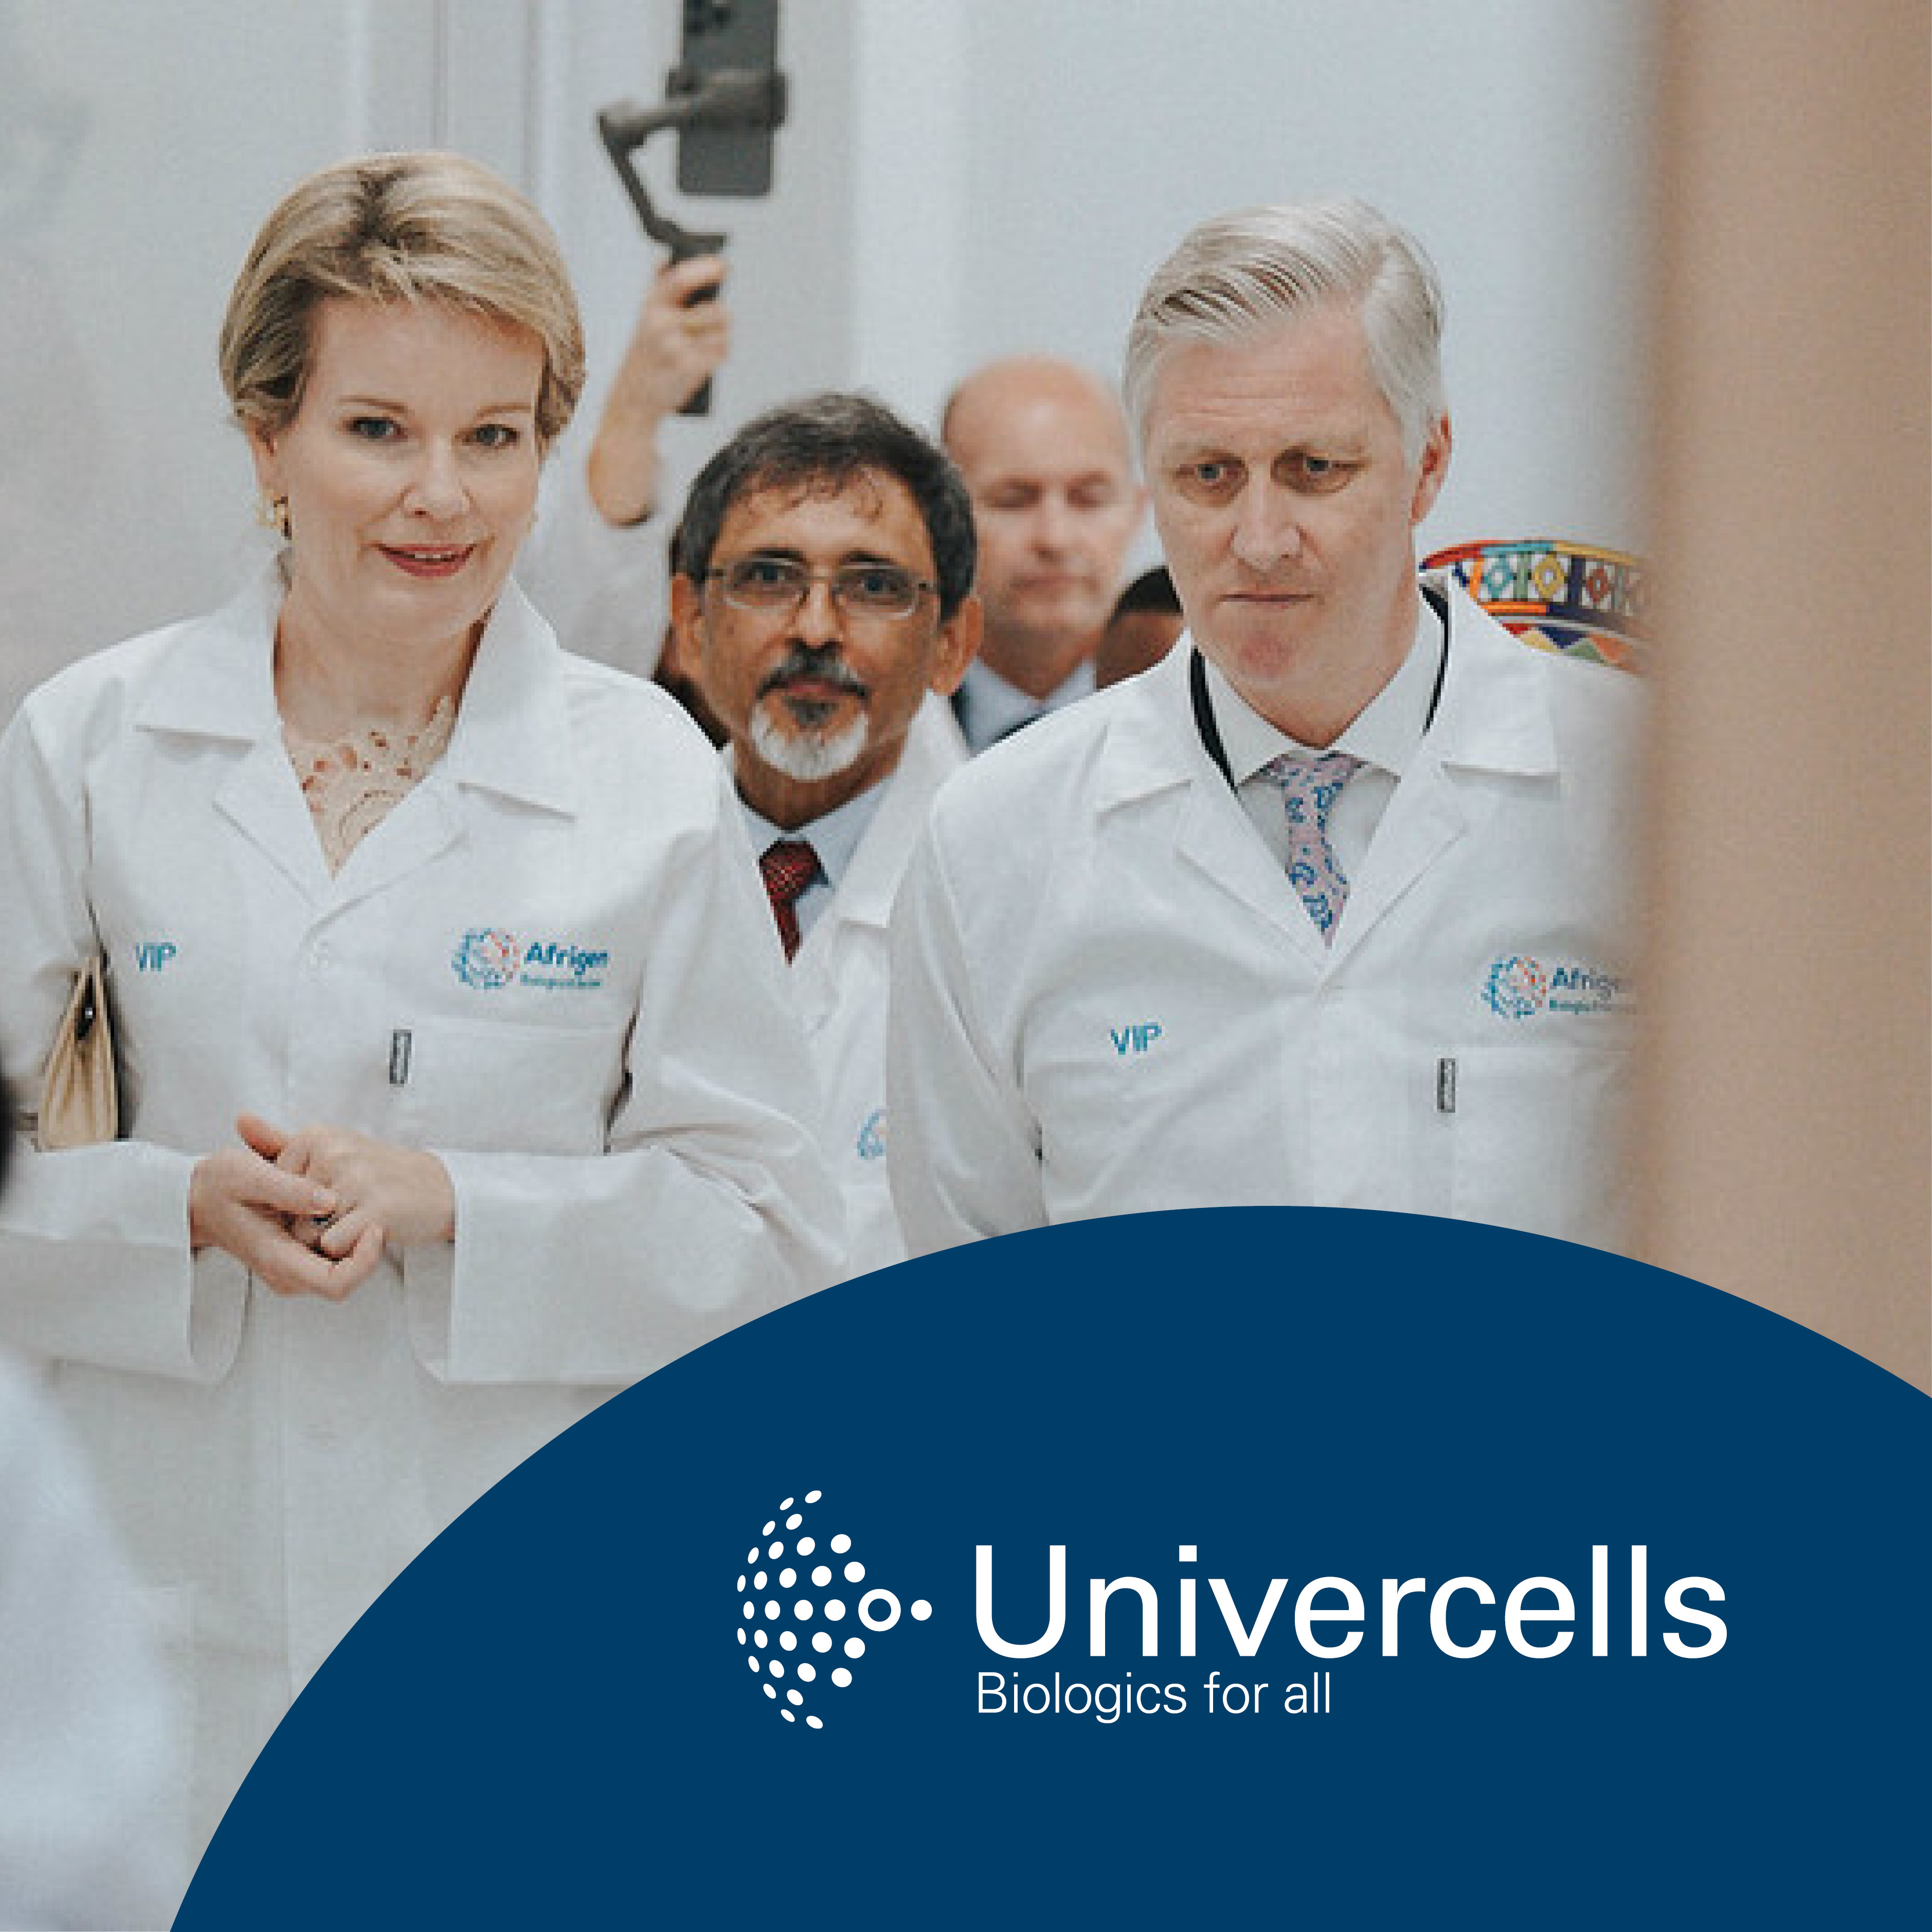 Press Release: visit of the King and the Queen of the Belgians to Afrigen Biologics